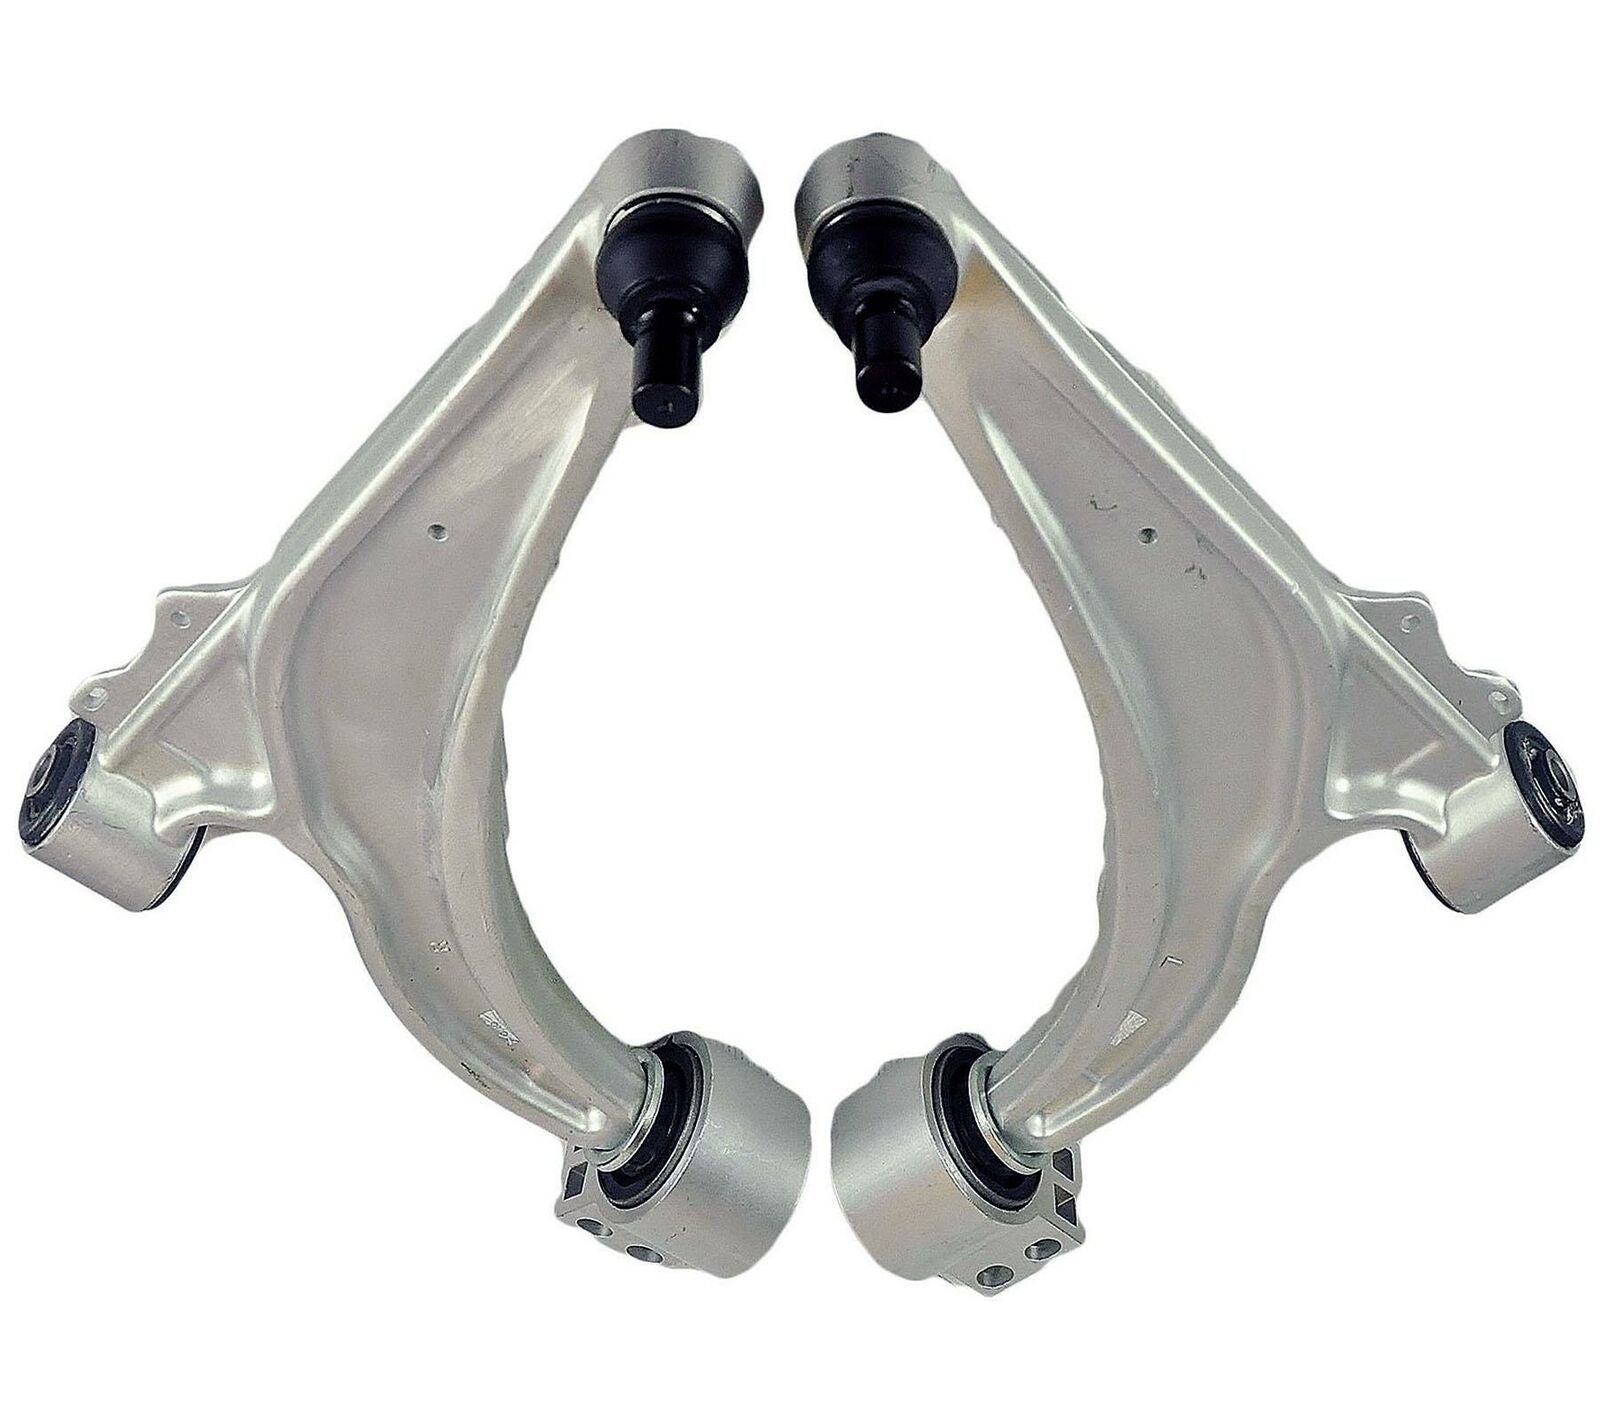 Pair Of Front Lower Suspension Wishbone Control Arms For Chevrolet Cruze, Volt & Vauxhall/Opel Astra J/Mk6